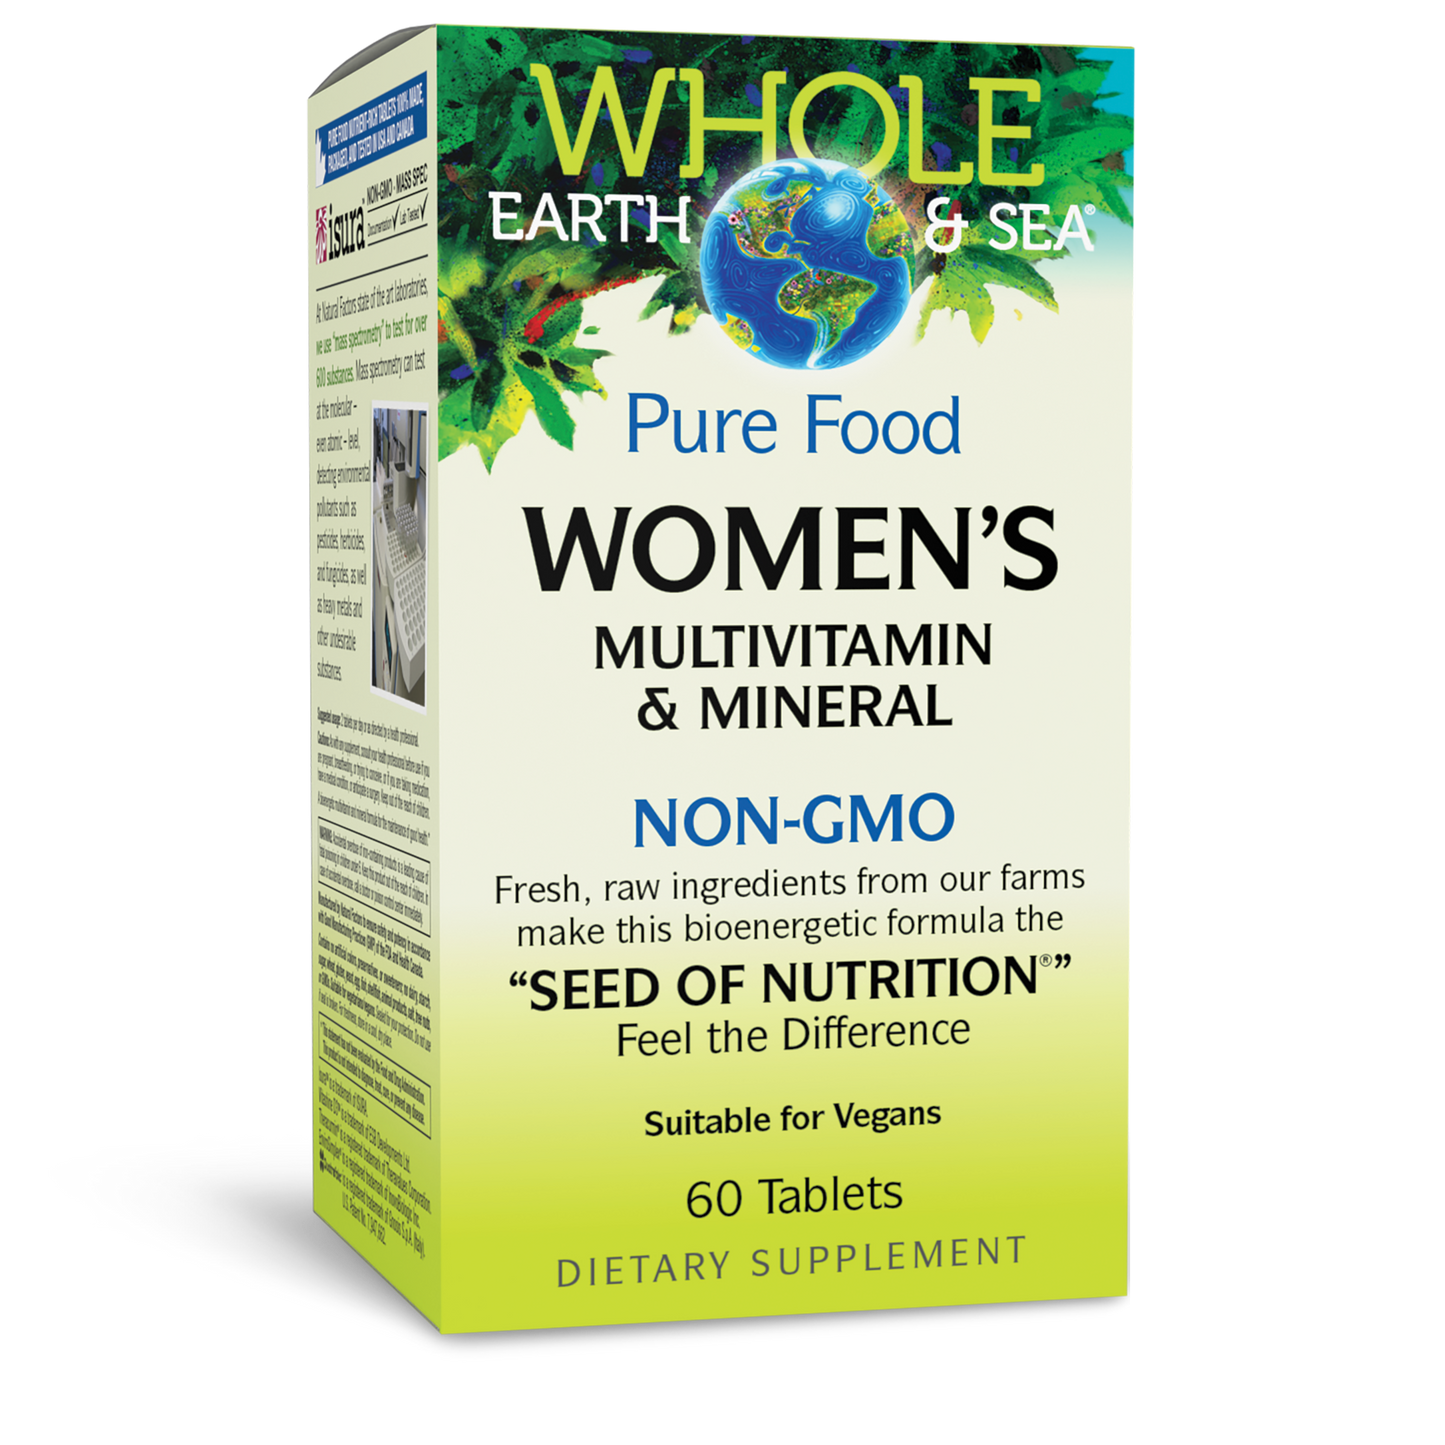 Women's Multivitamin & Mineral for Whole Earth & Sea® |variant|hi-res|35502U